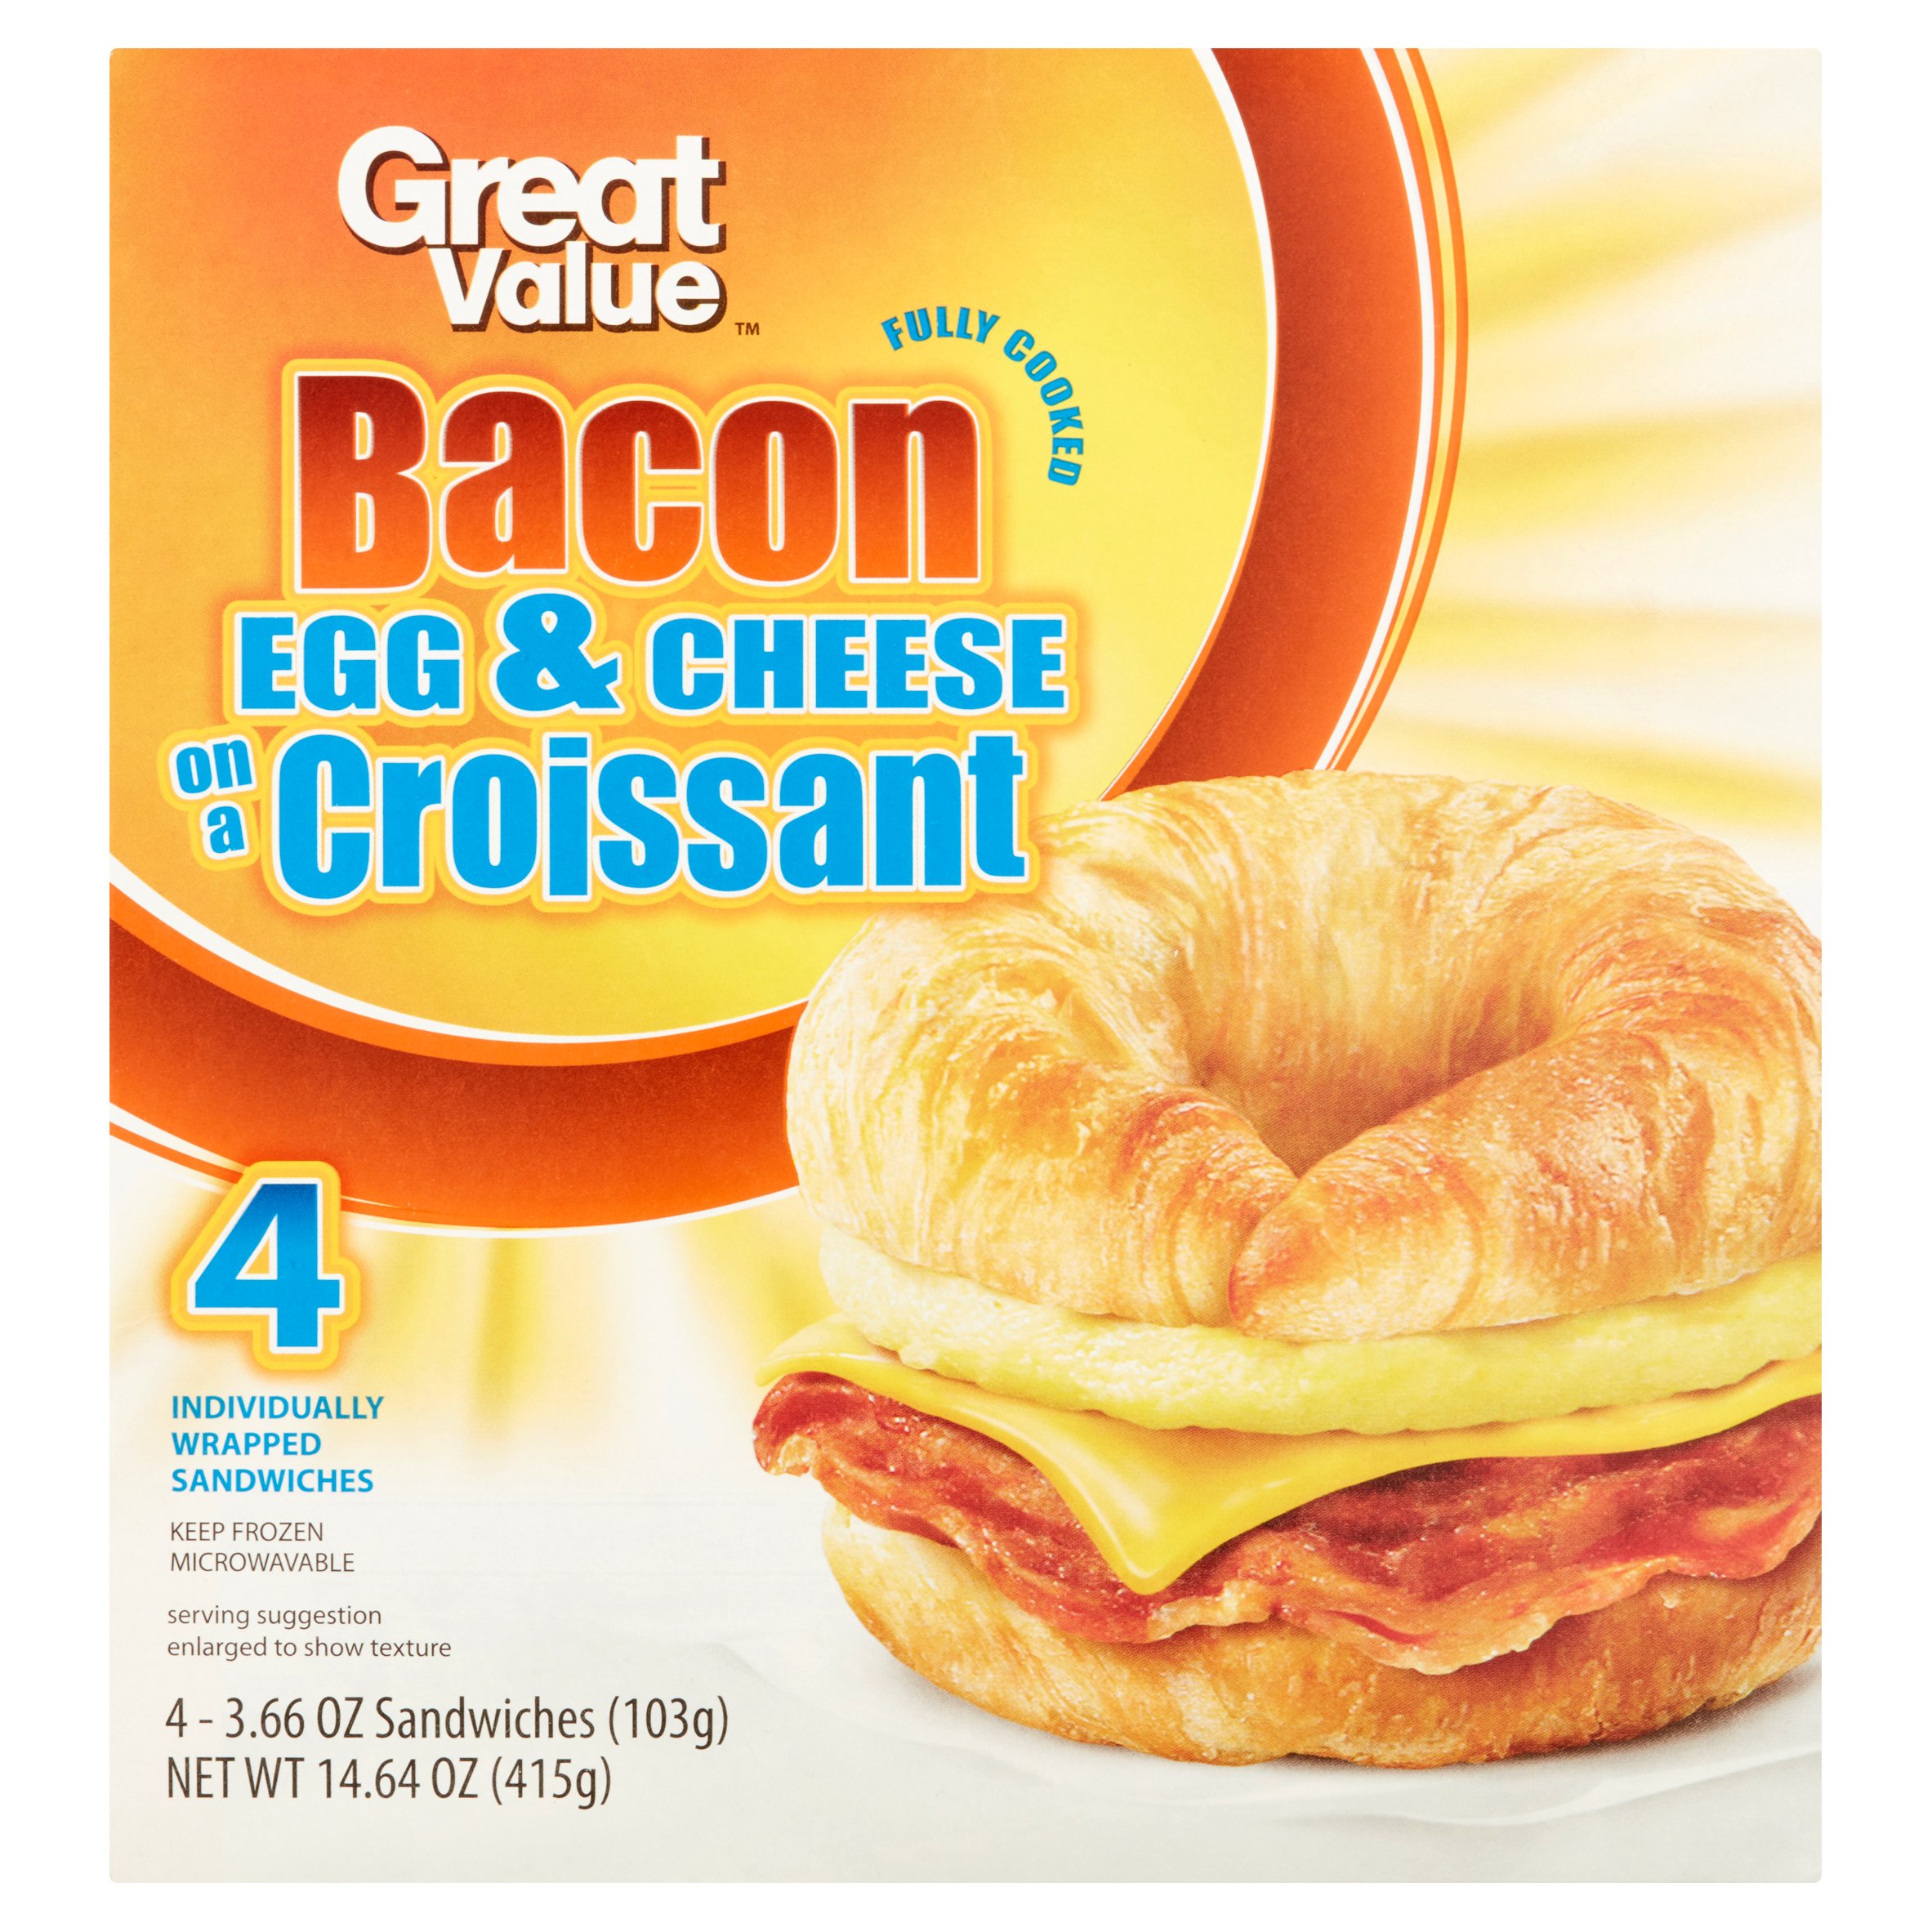 Great Value Fully Cooked Bacon Egg & Cheese on a Croissant Sandwiches, 3.66 Oz, 4 Count Image